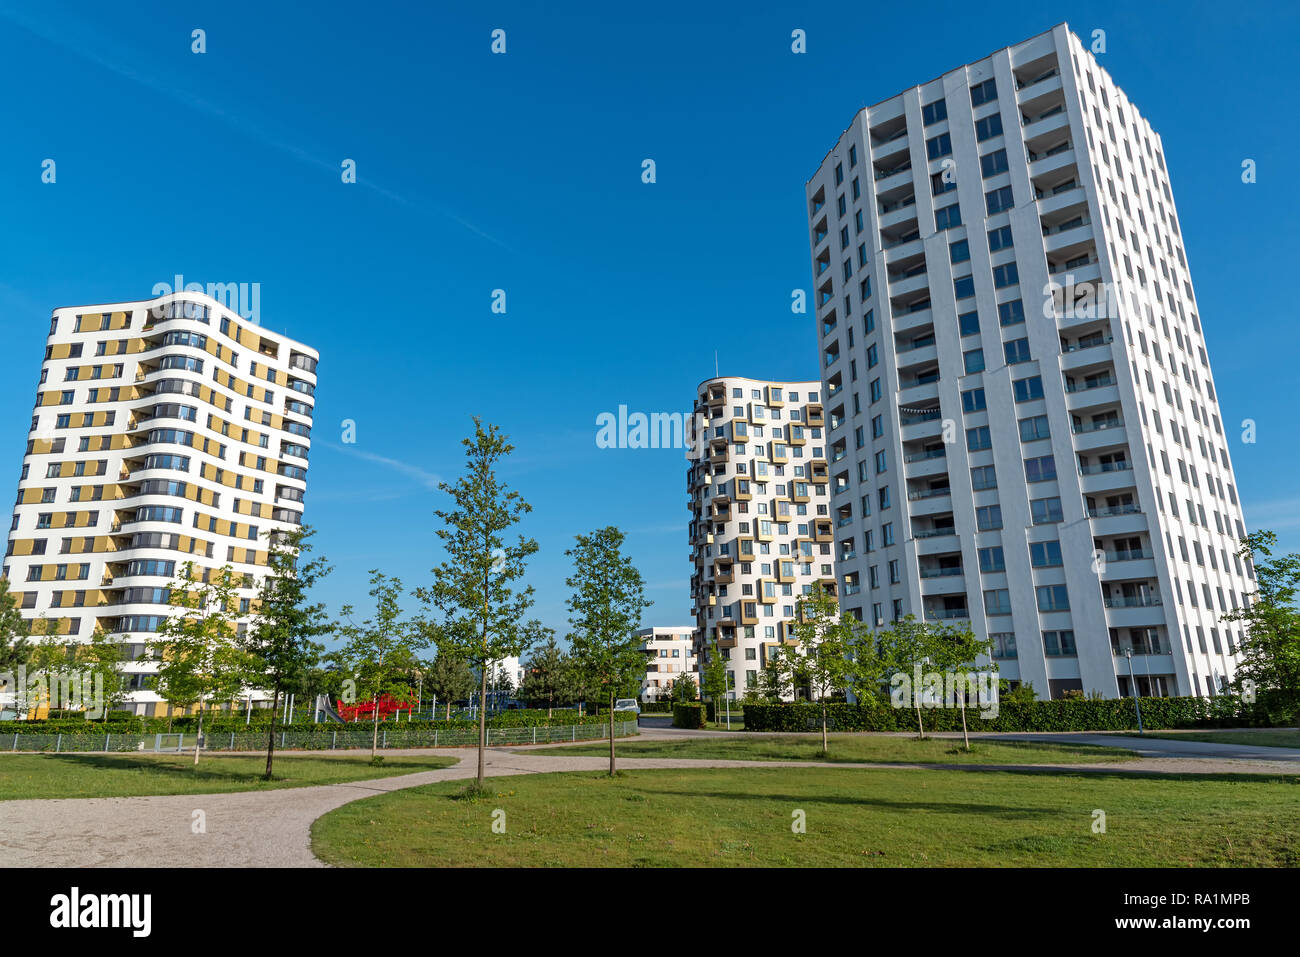 Modern multistory apartment buildings seen in Munich, Germany Stock Photo